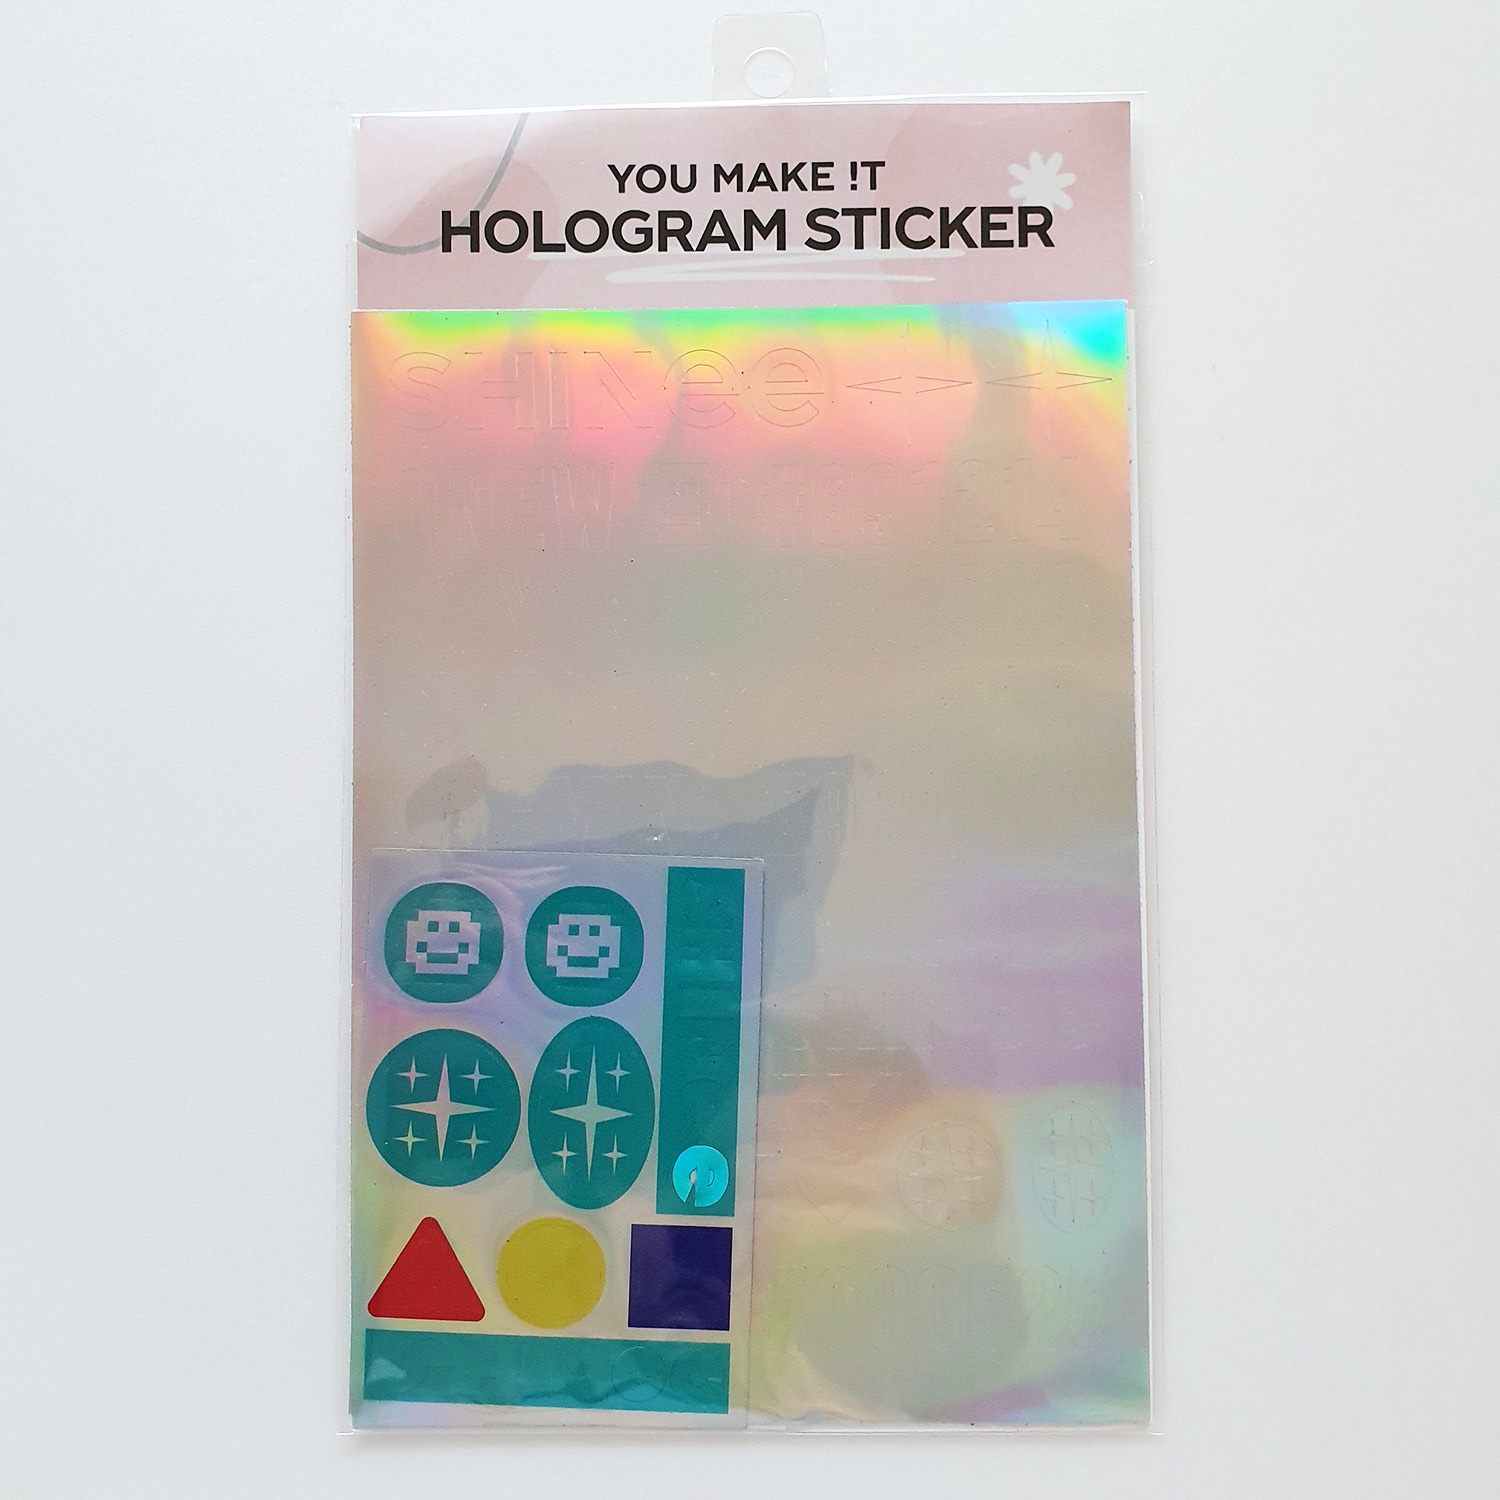 SM TOWN 【メーカー直送】 DDP STORE Artist 優れた品質 Official Goods Hologram It Sticker You Make :